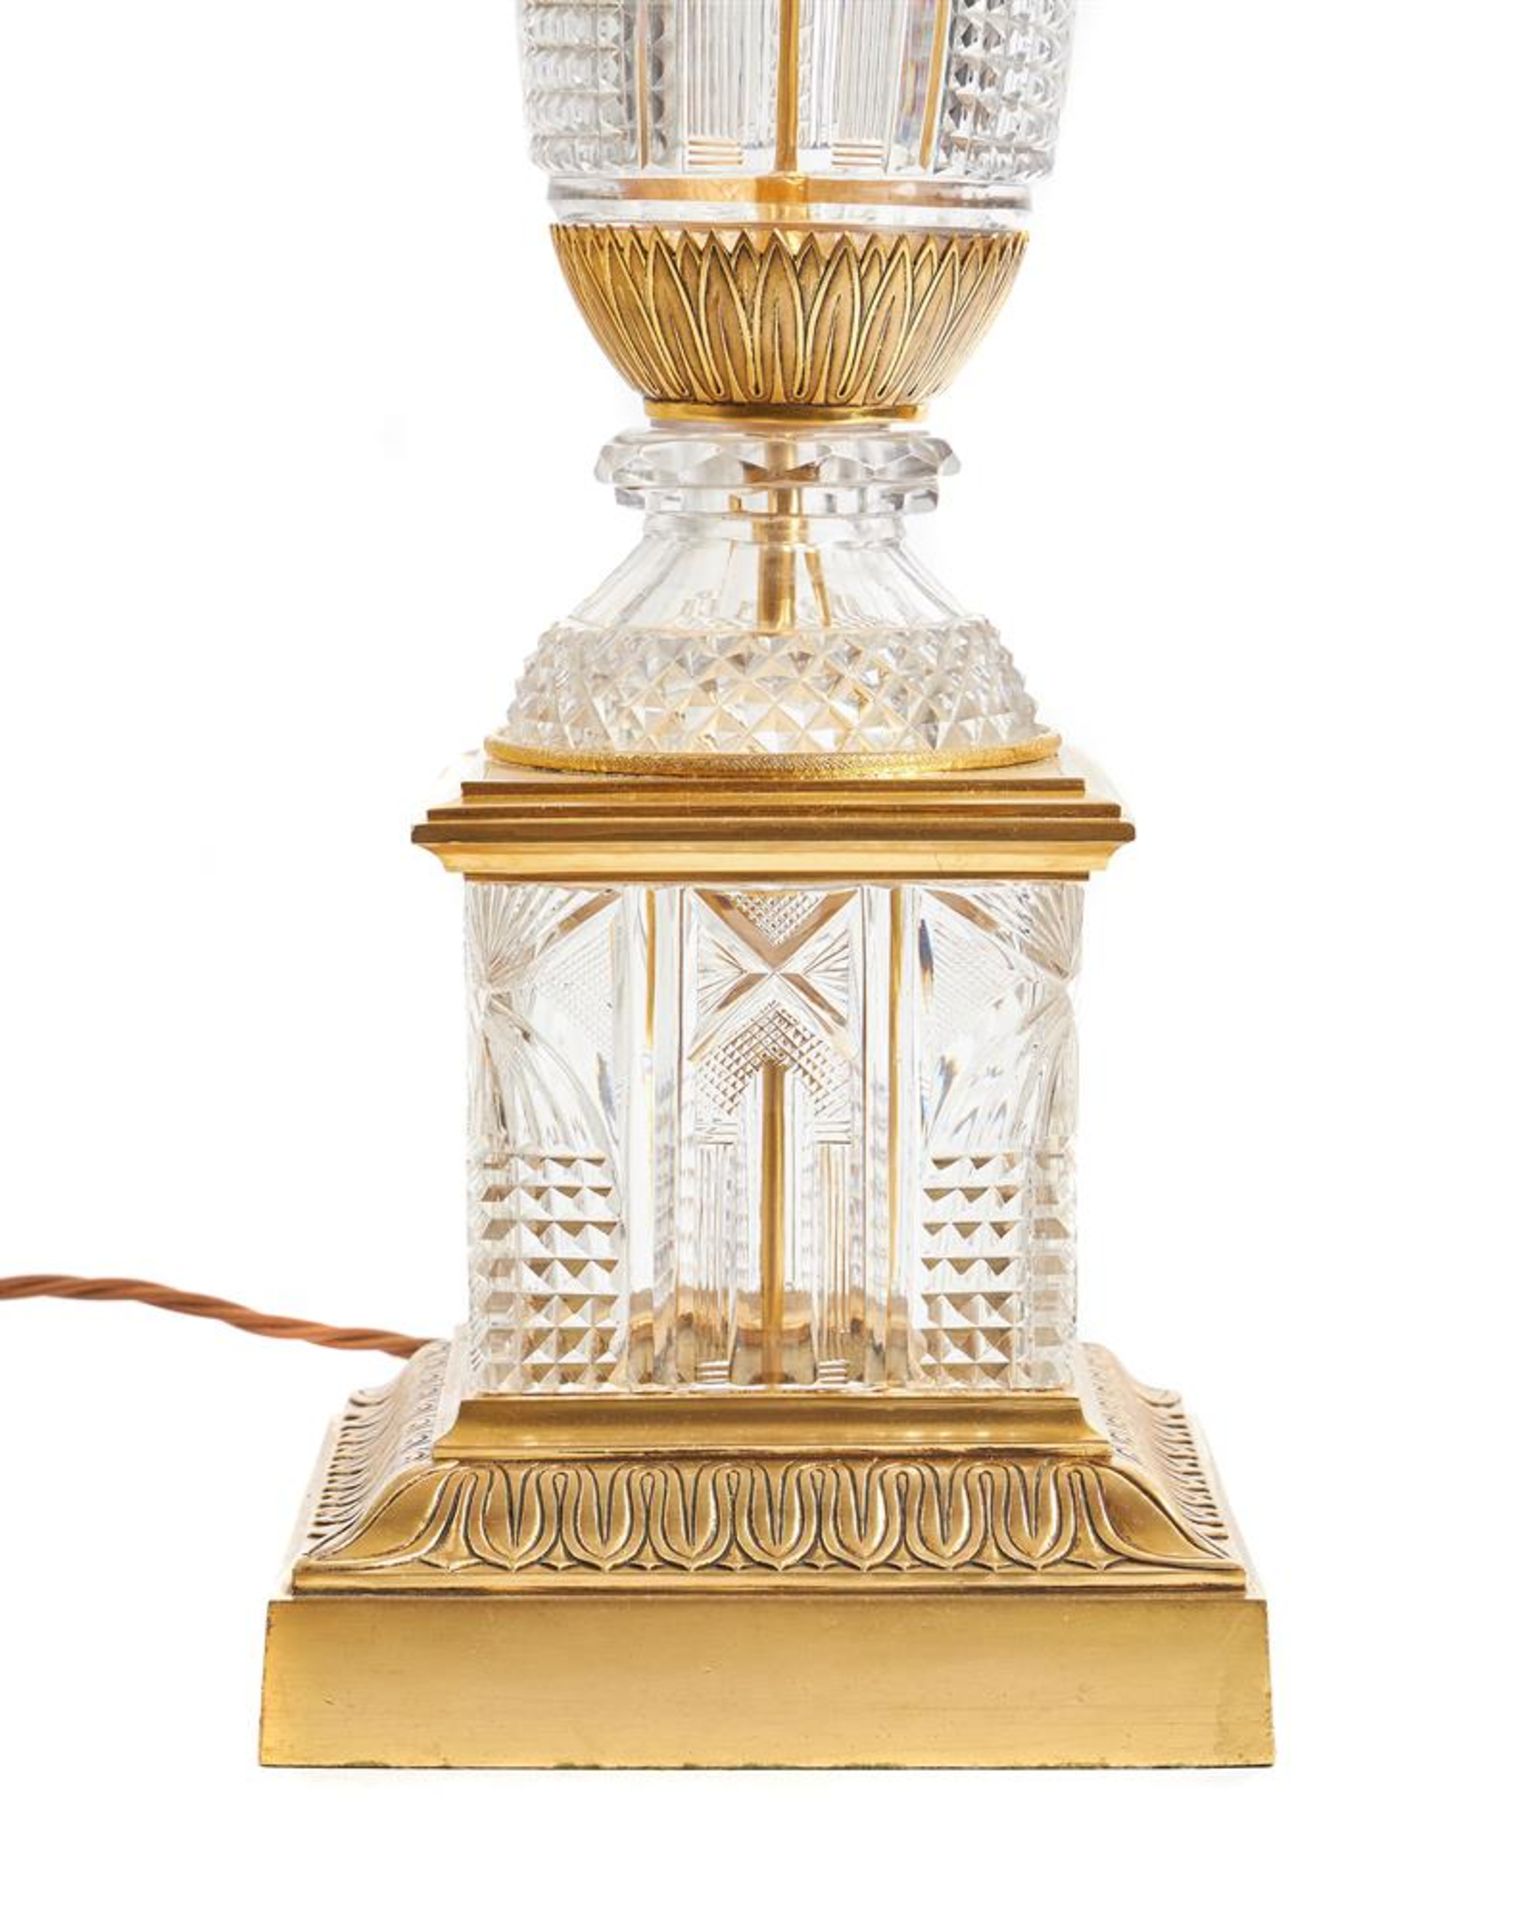 A FRENCH CUT AND MOULDED GLASS AND GILT BRONZE COLUMNAR TABLE LAMP, ATTRIBUTED TO MAISON JANSEN - Image 3 of 3